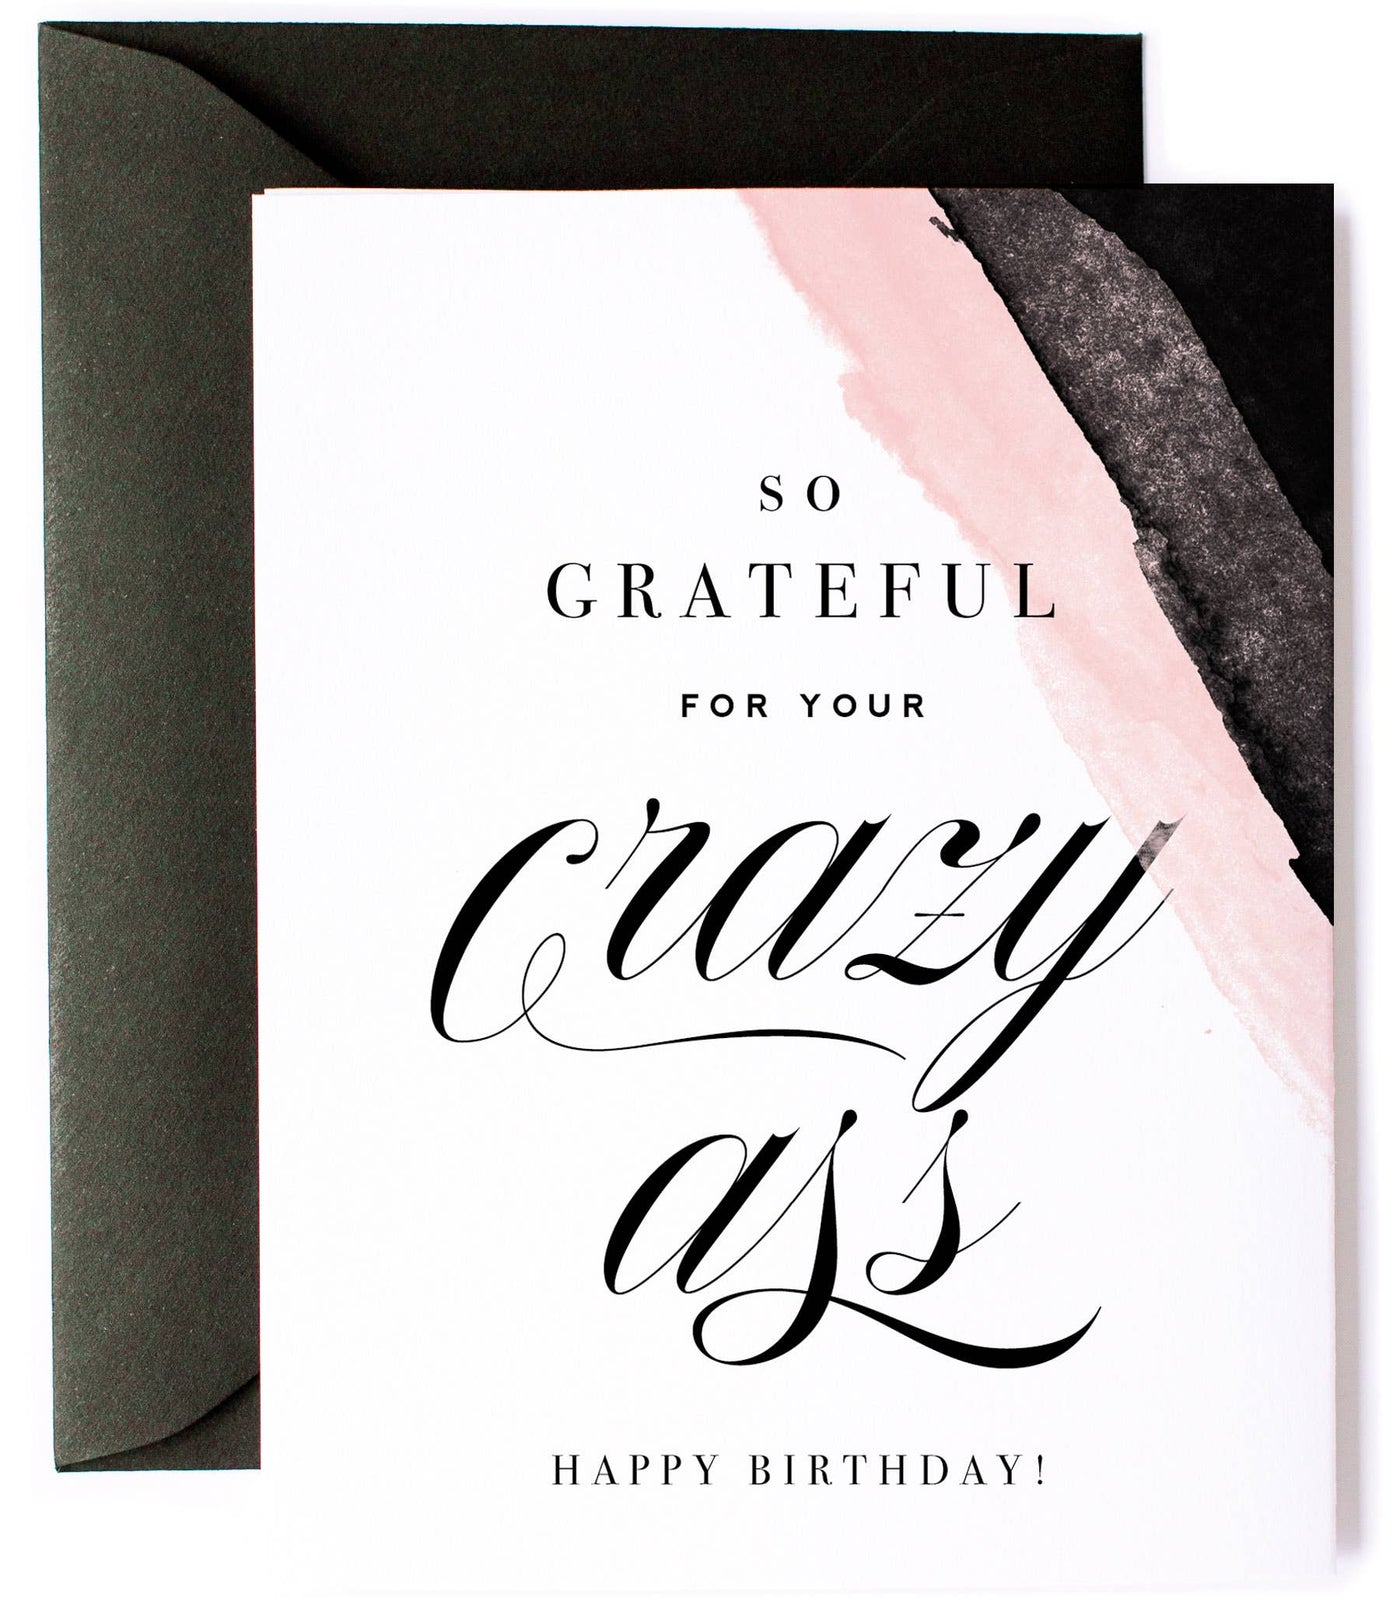 Grateful for Your Crazy Ass, Funny Birthday Card